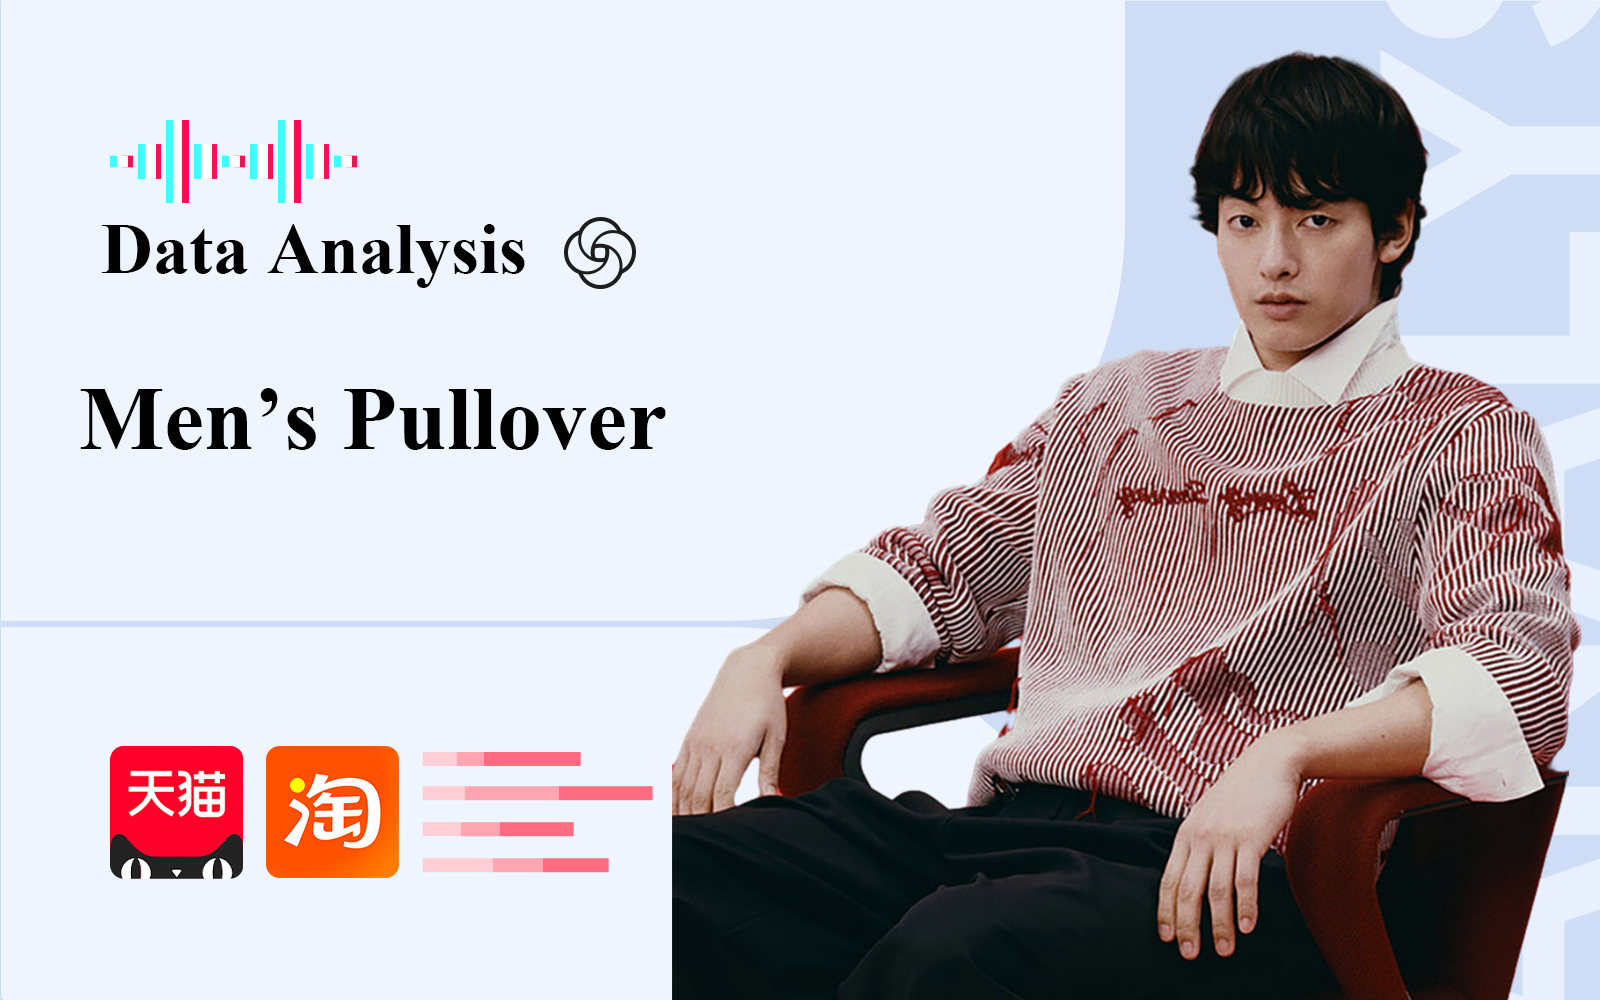 Pullover -- The Data Analysis of Menswear E-Commerce